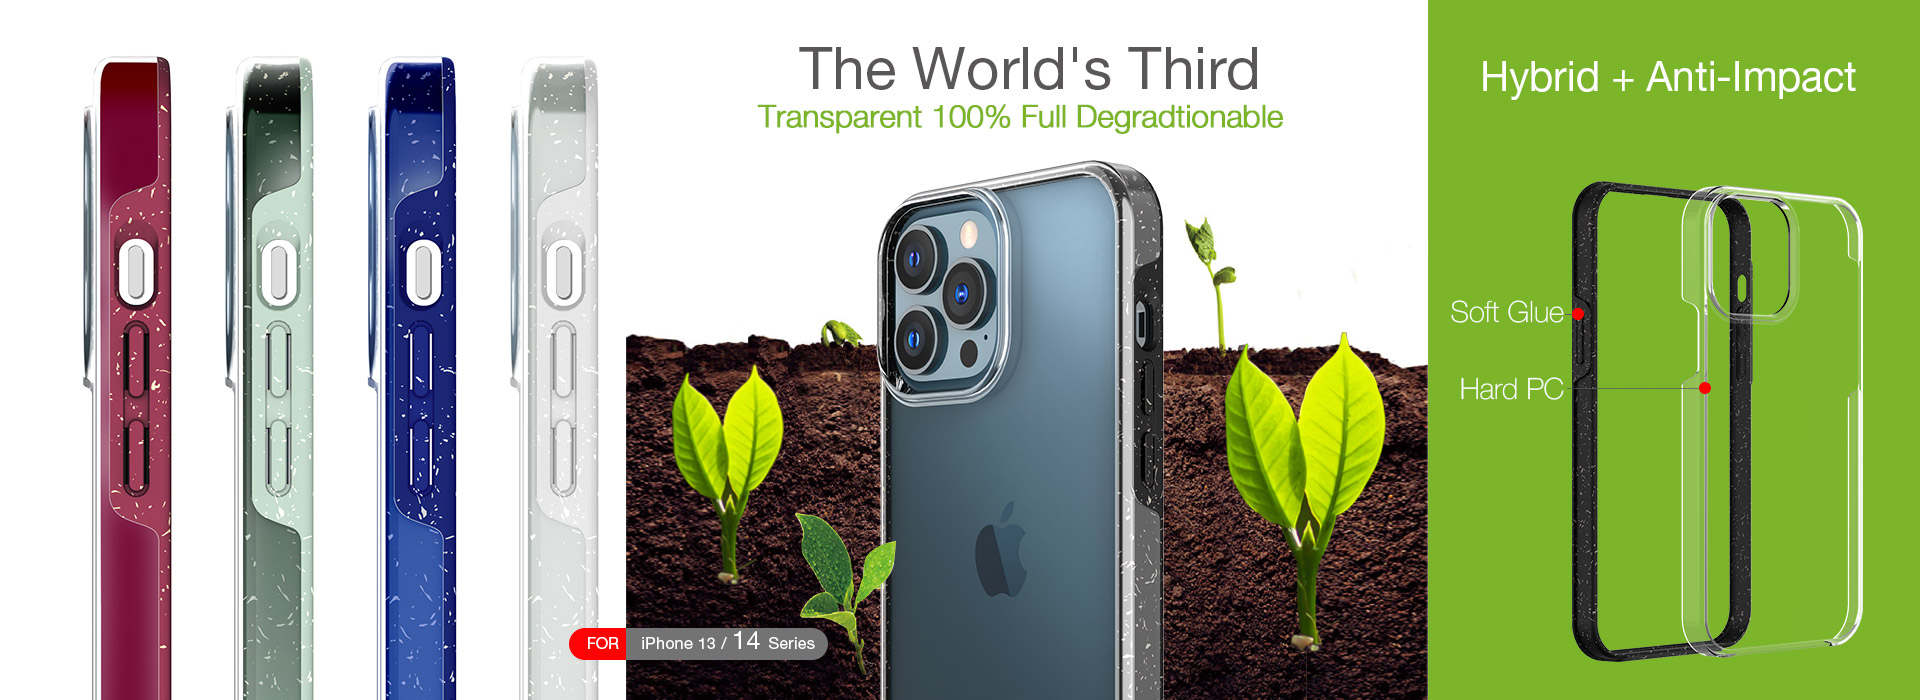 X-Fitted Transparent Hybrid 100% biodegradable and degradable iphone14 case